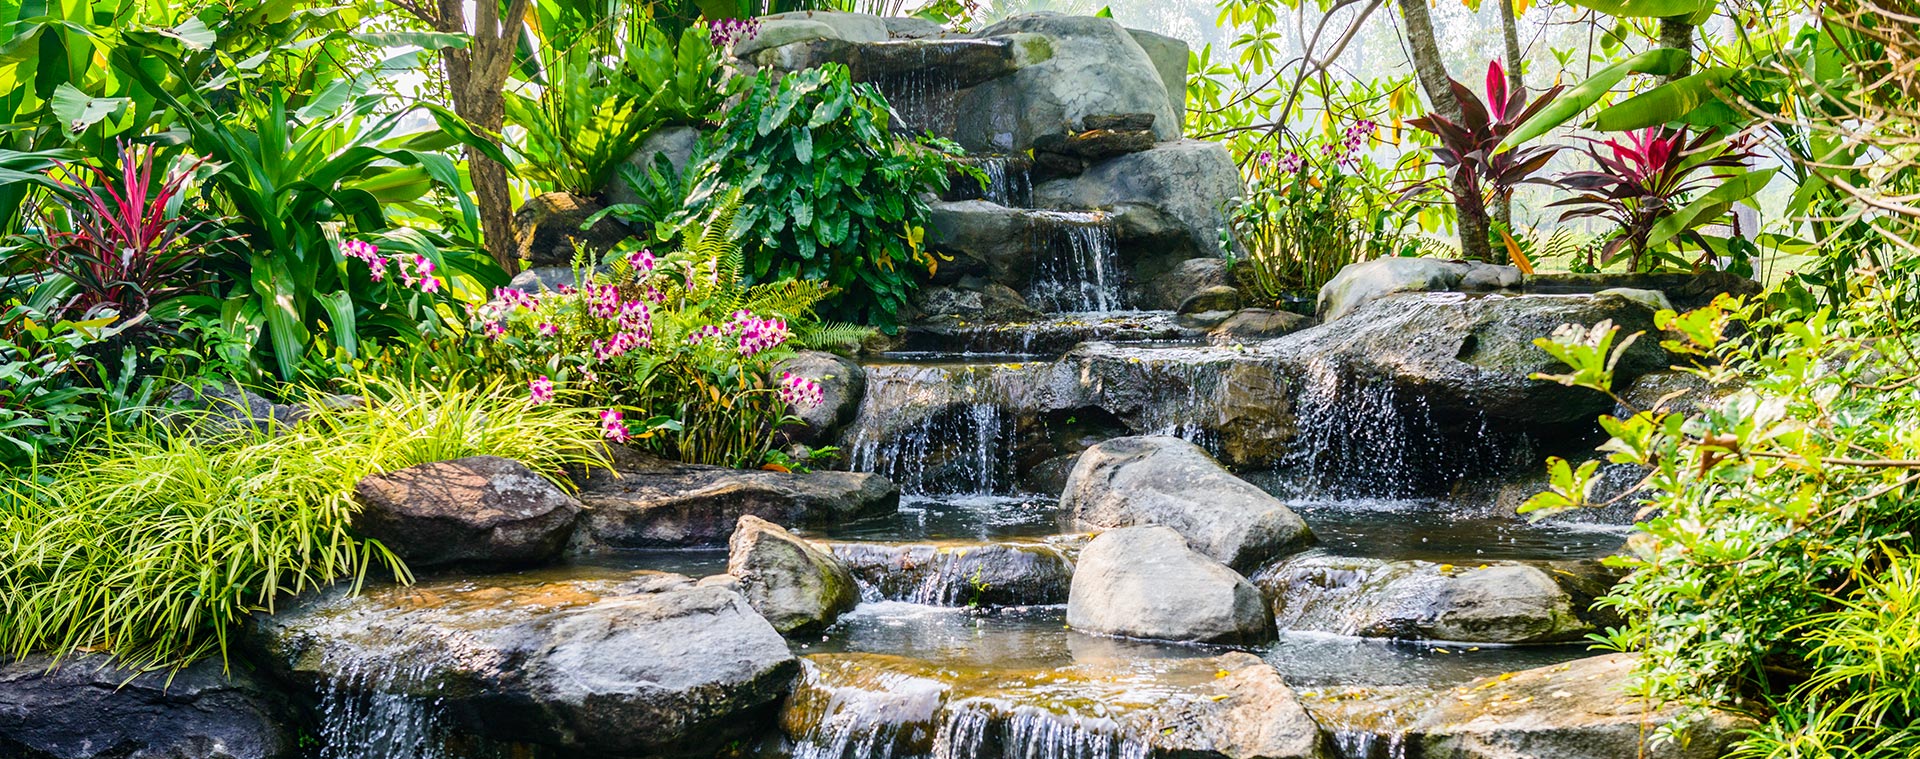 Exotic Landscape Design, Professional Landscaping Services Anderson Indiana